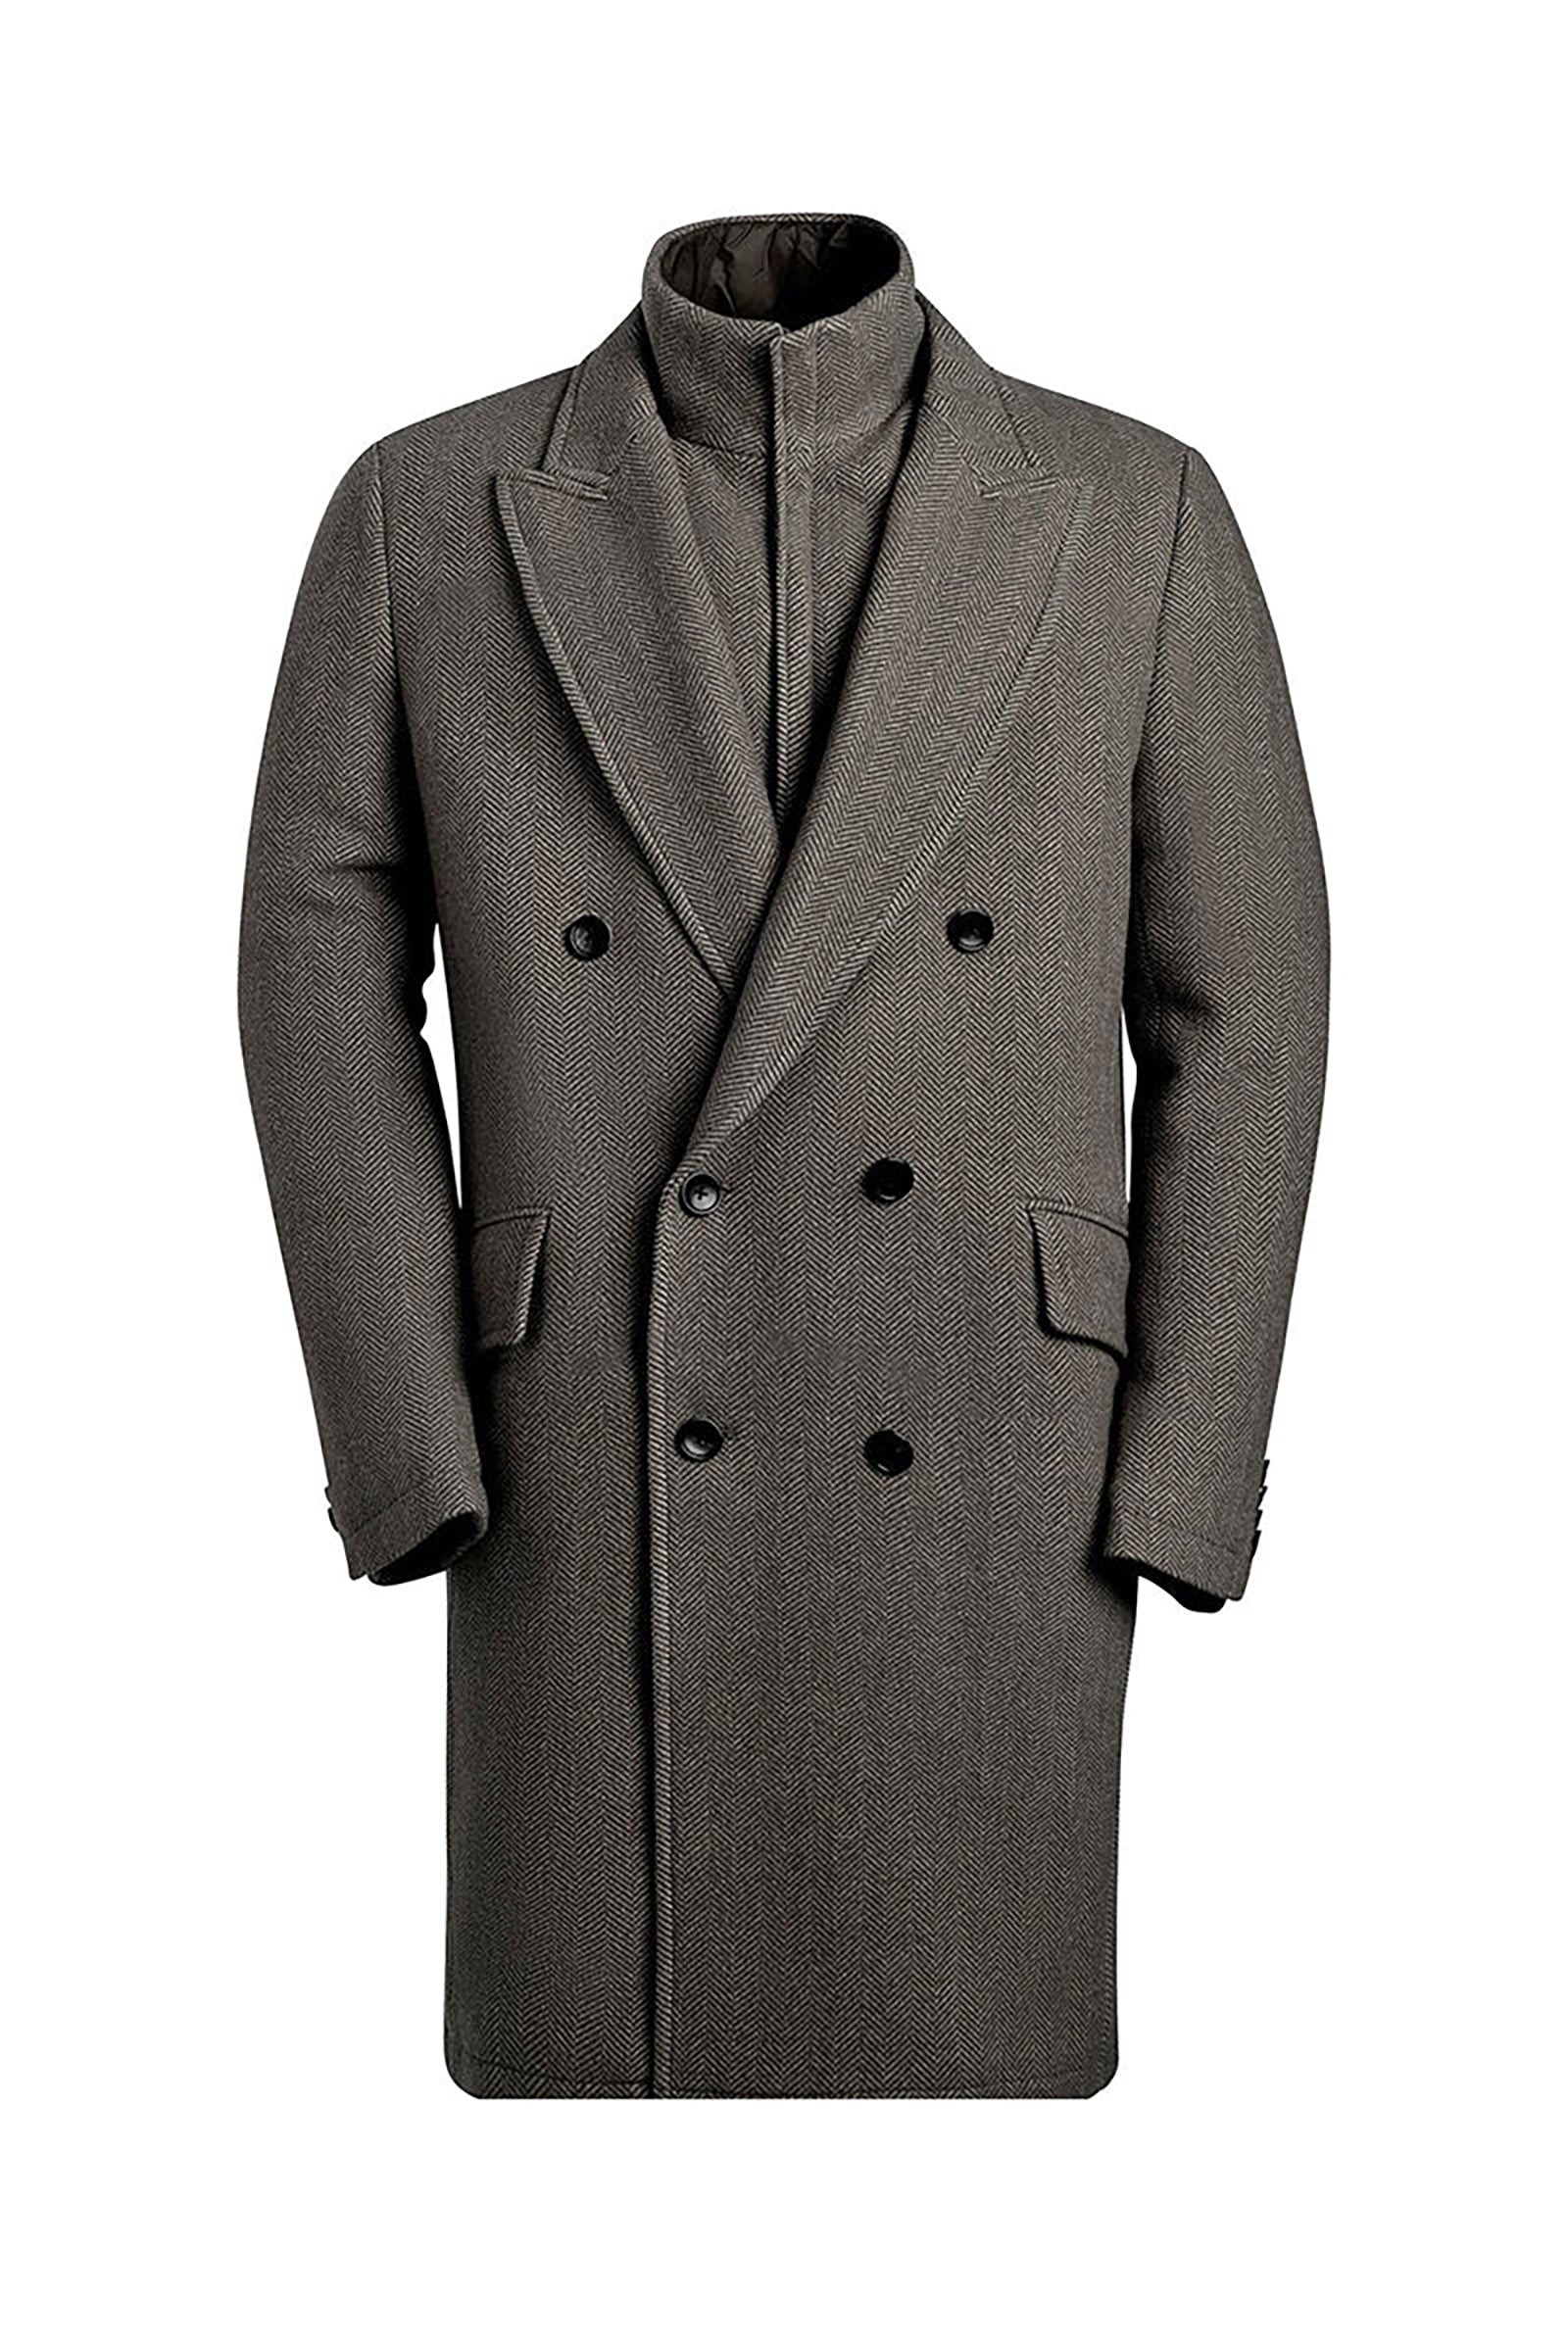 Cardinal of Canada-CA - Townsend charcoal herringbone top coat wool and cashmere 41.5 inch length